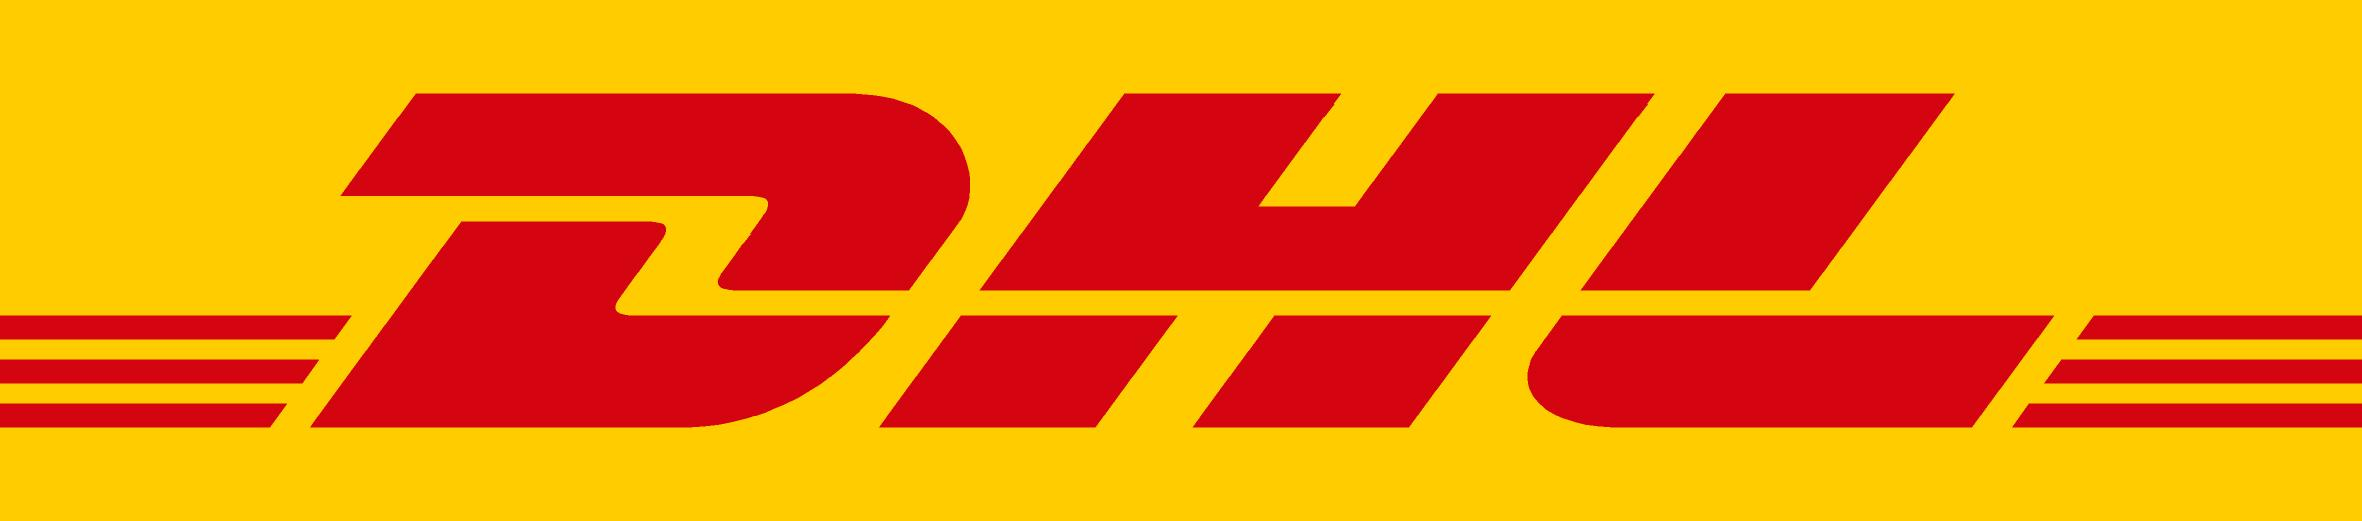 DHL expectations for Africa: 2015 outlook